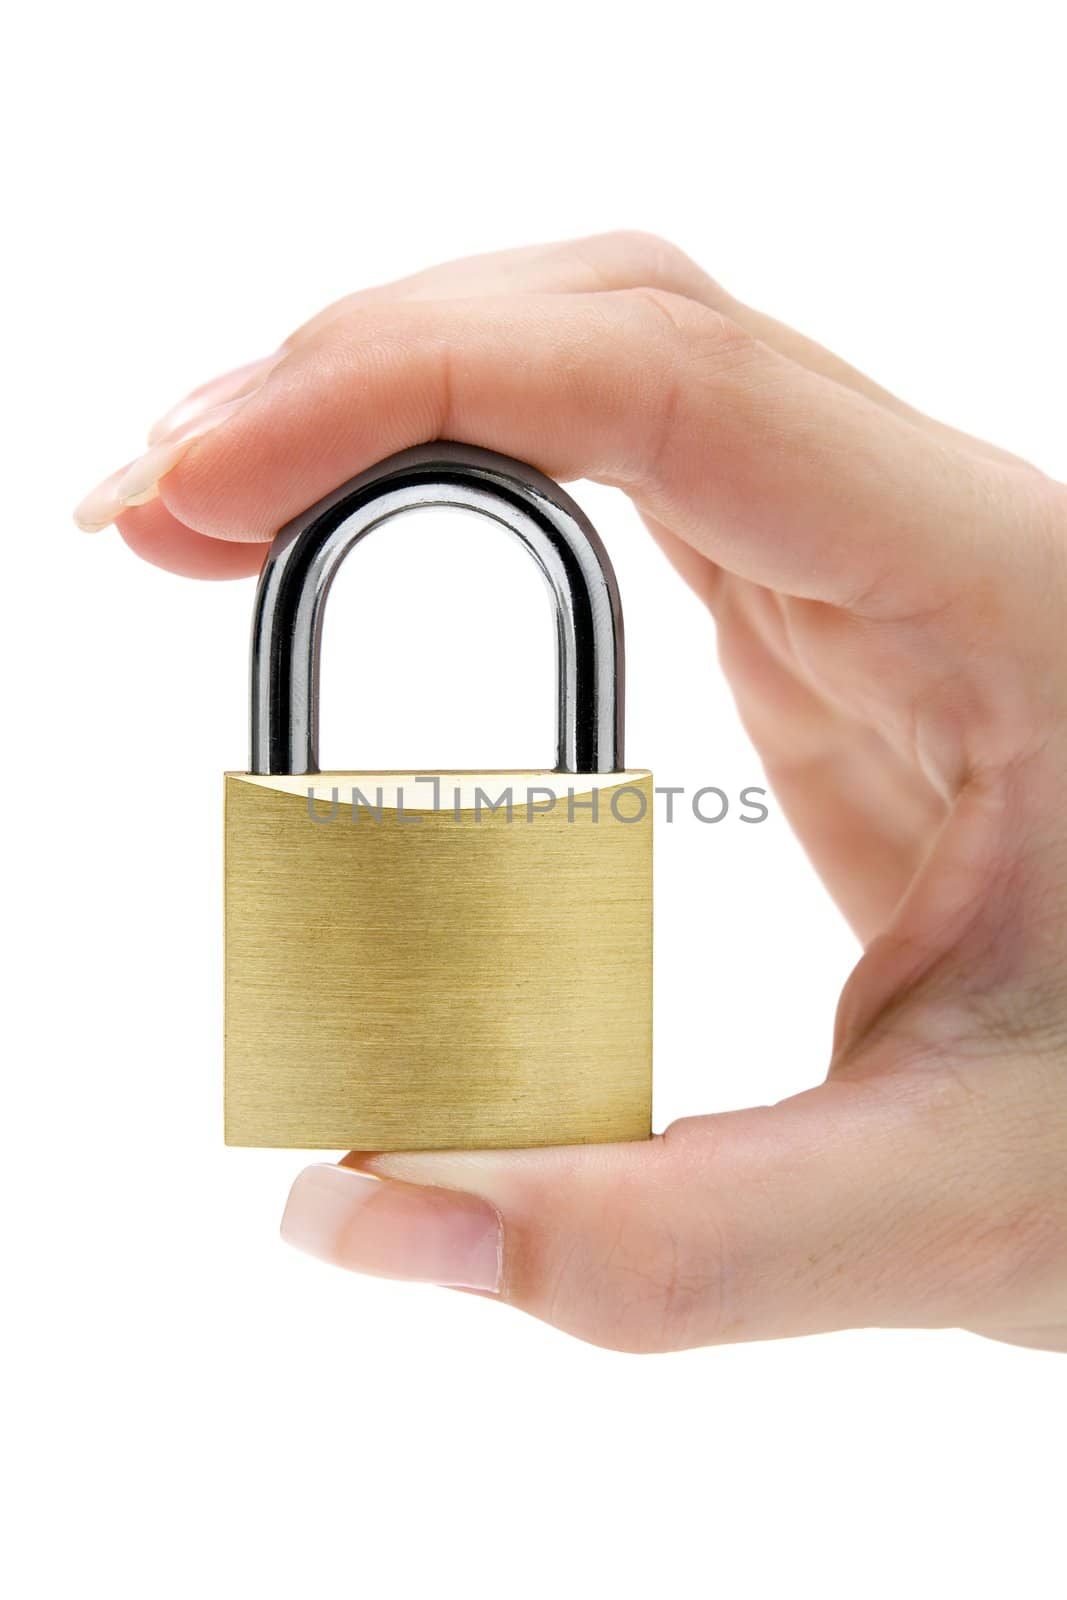 Holding a Padlock by winterling